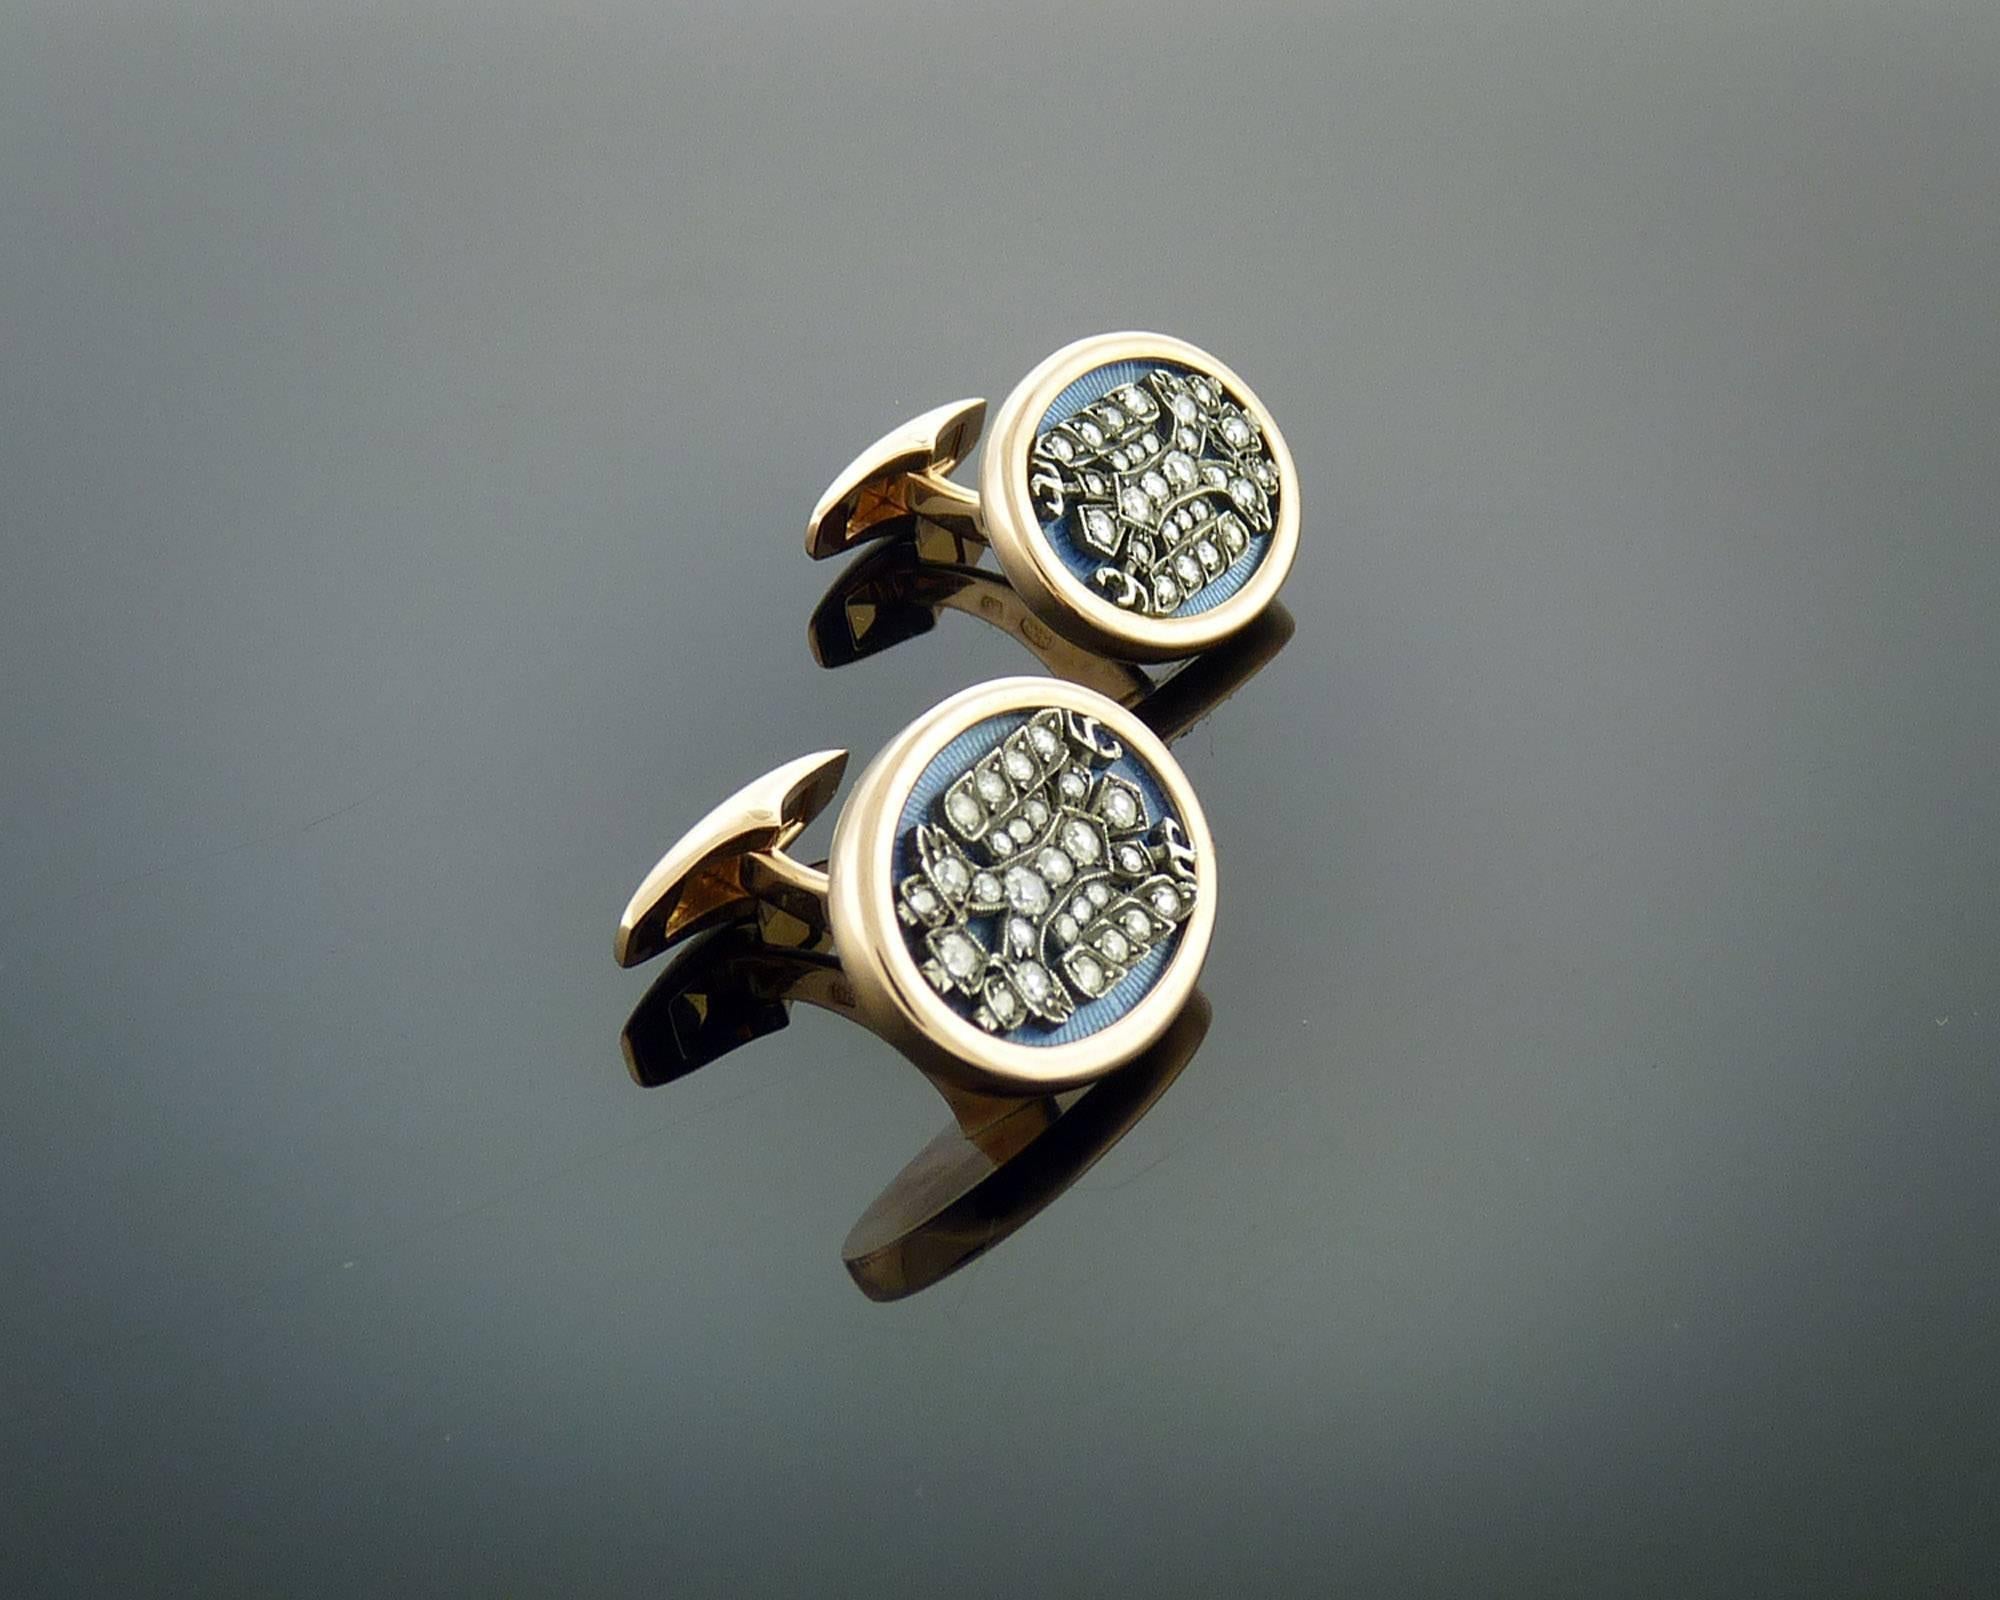 Diamond Enamel Silver Topped Rose Gold Cufflinks in Imperial Russian Style For Sale 1